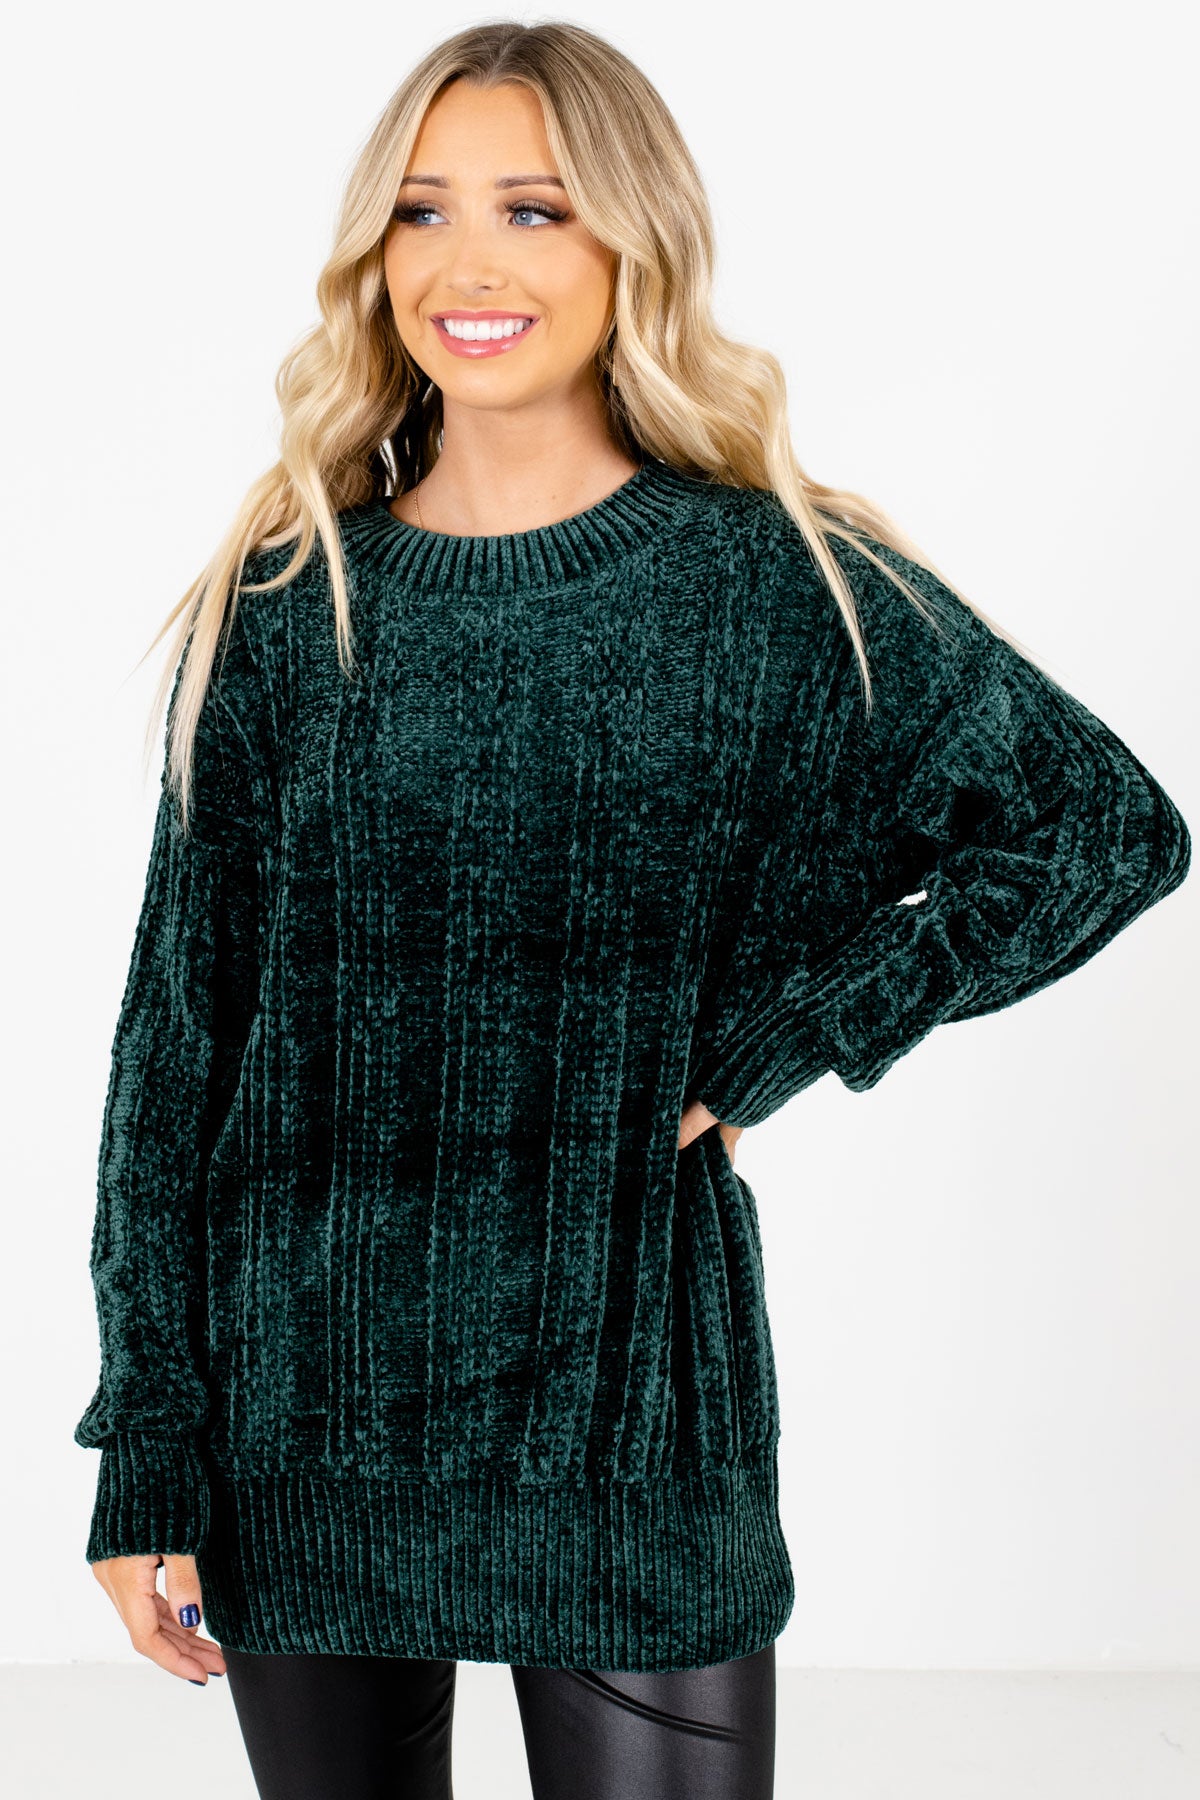 Green High-Quality Knit Material Boutique Sweaters for Women